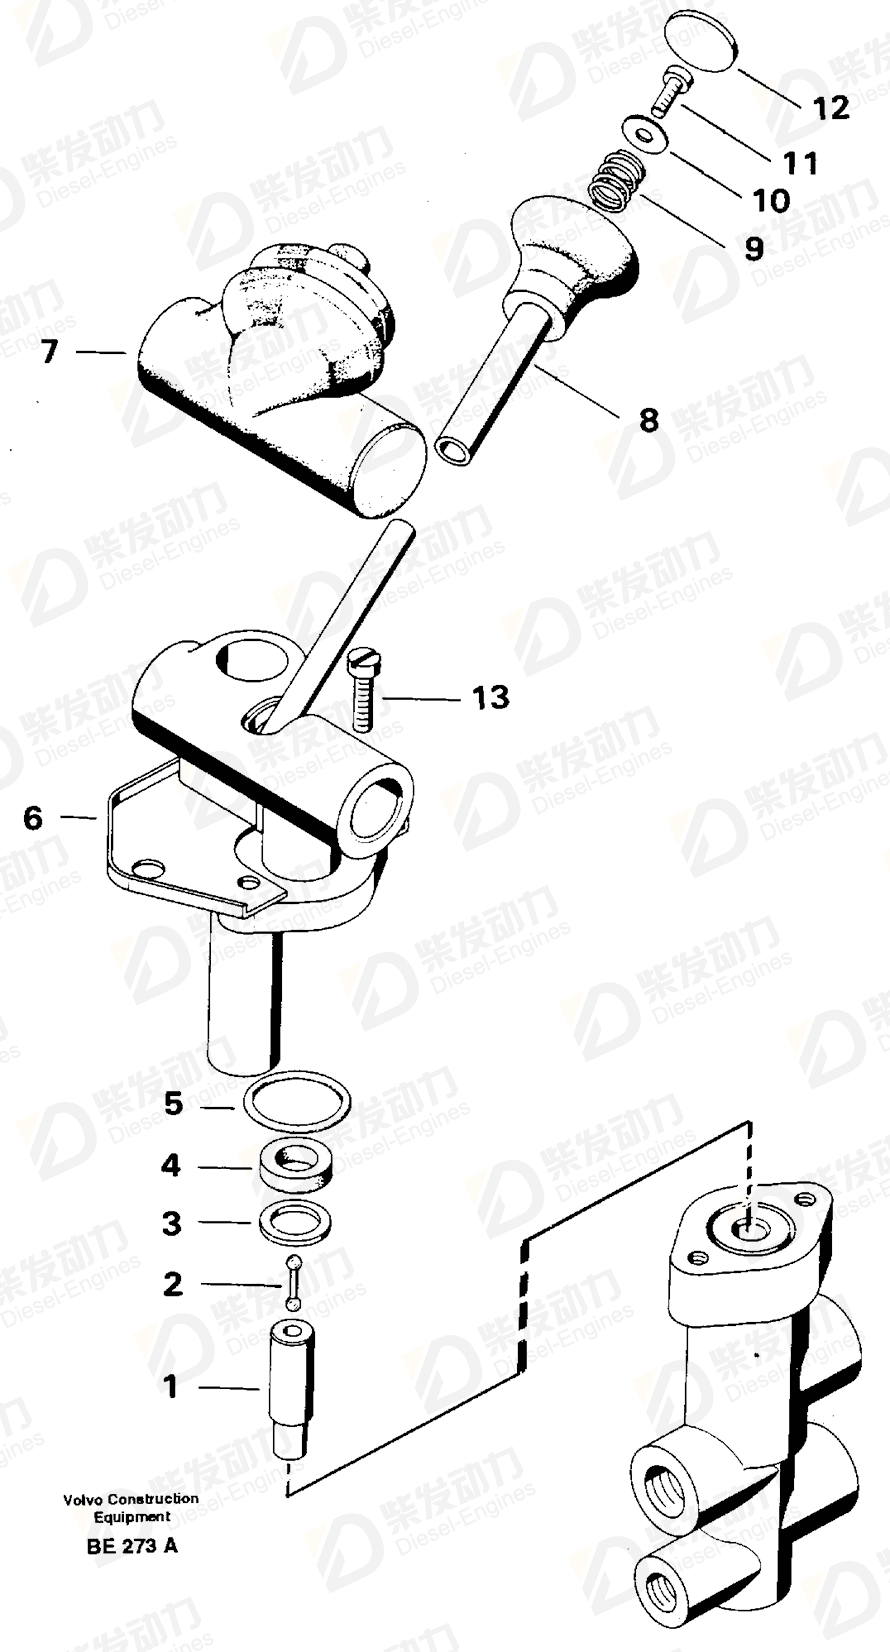 VOLVO Washer 11991830 Drawing